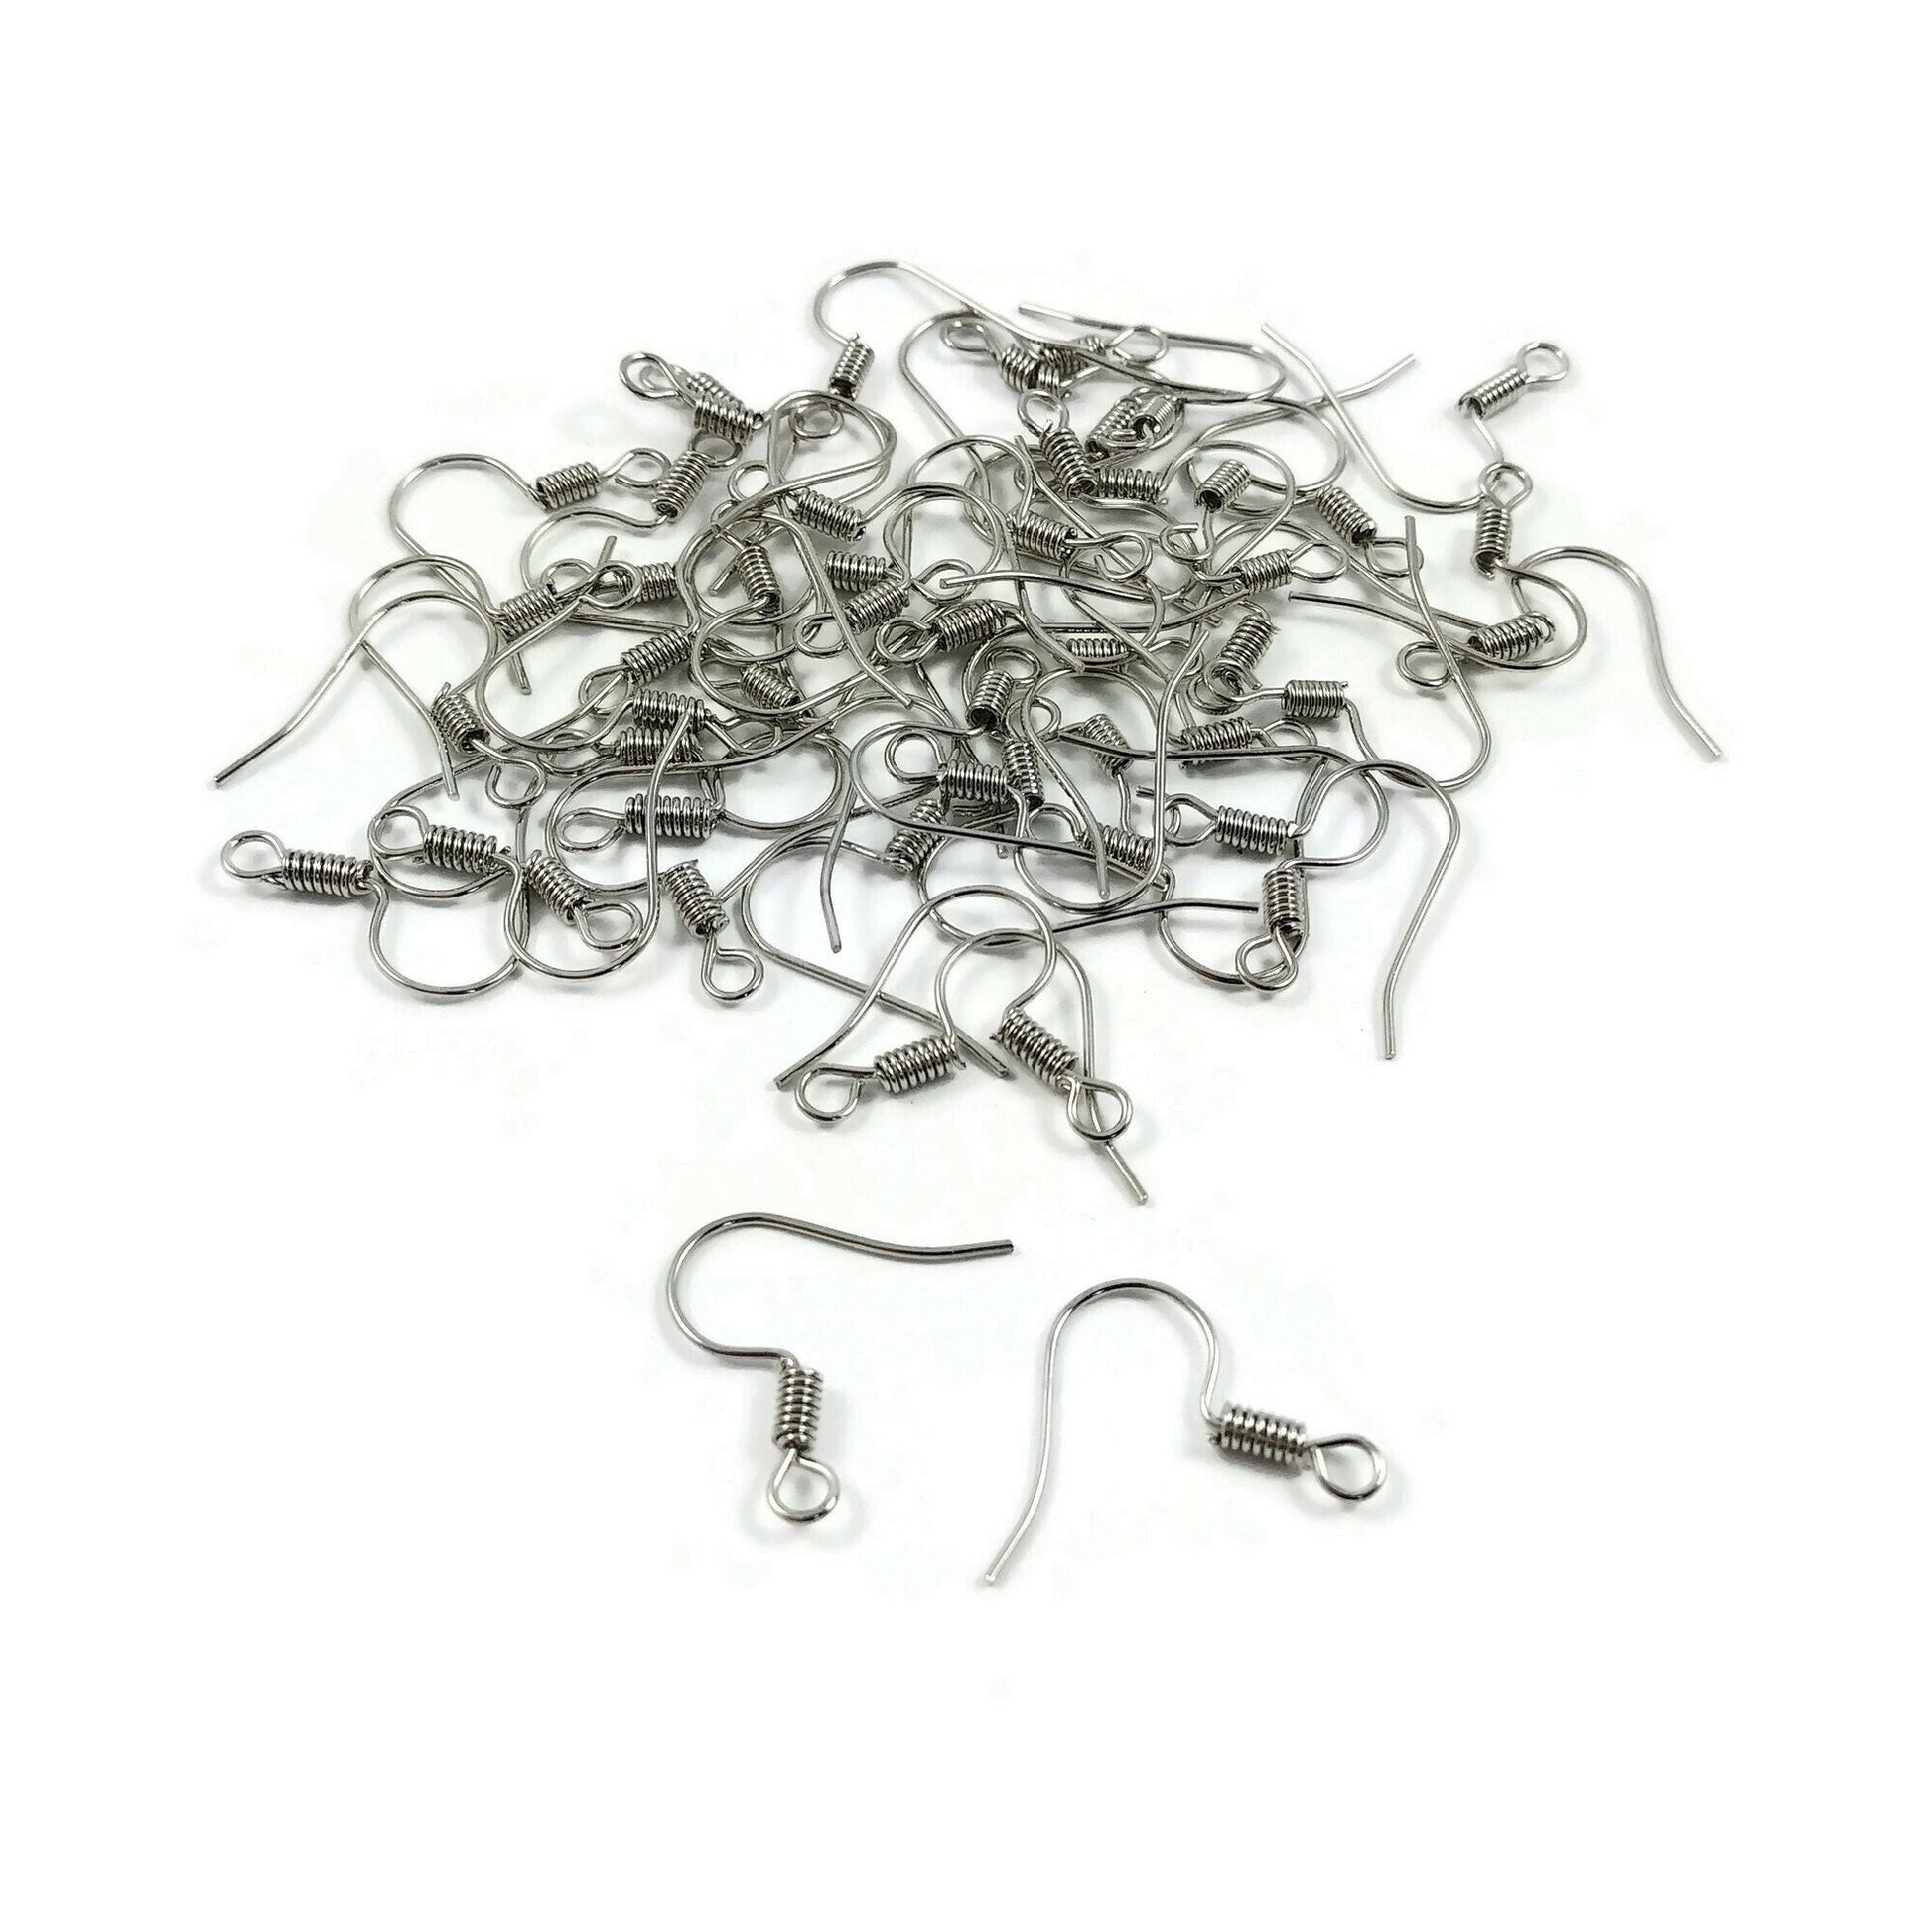 Earring hooks - Silver - Nickel free, lead free and cadmium free ear wire